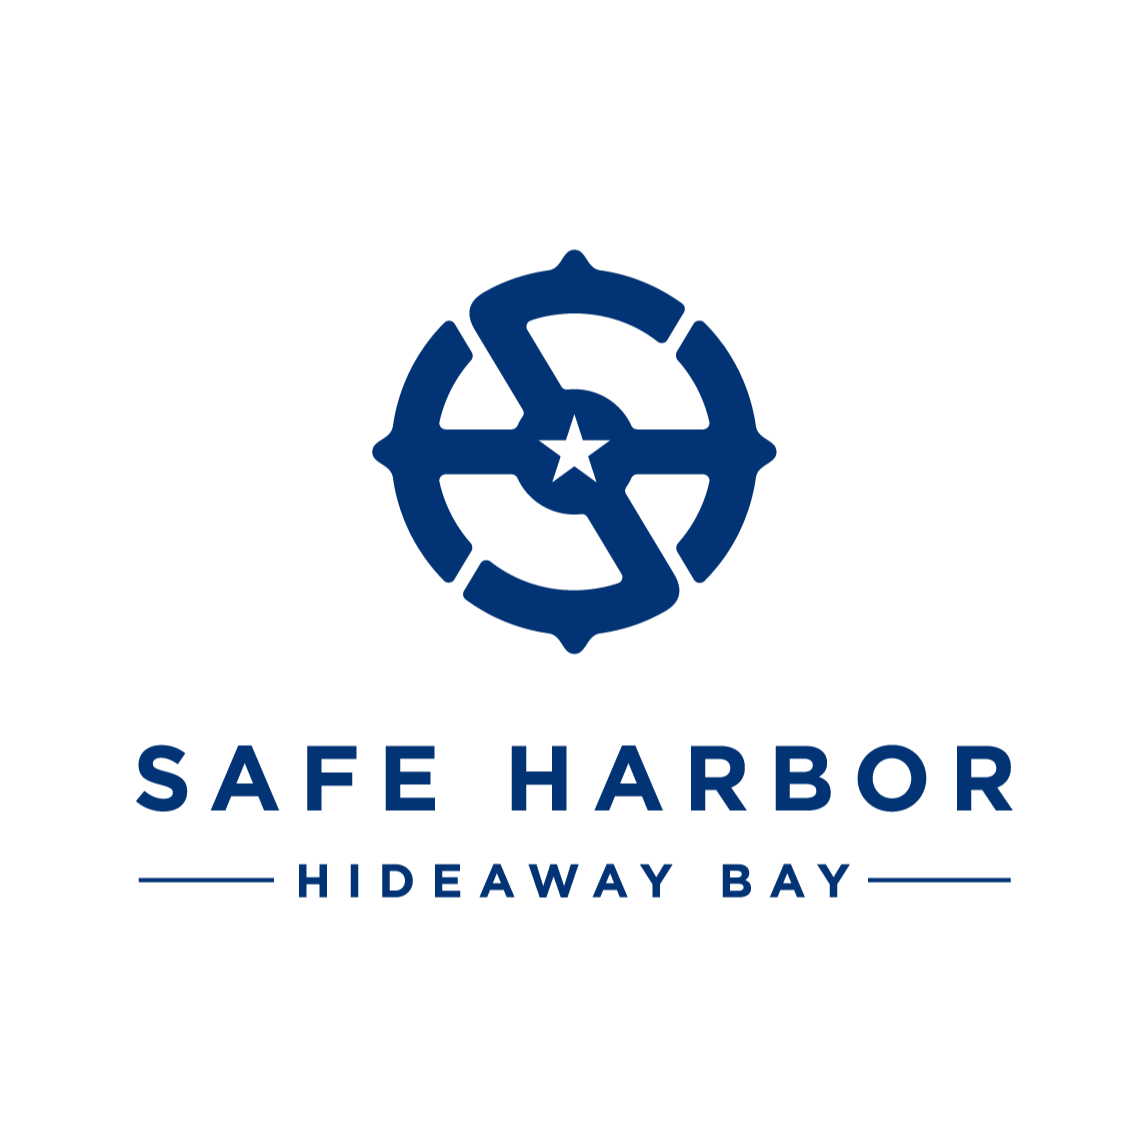 Safe Harbor Hideaway Bay - Flowery Branch, GA 30542 - (770)967-5500 | ShowMeLocal.com